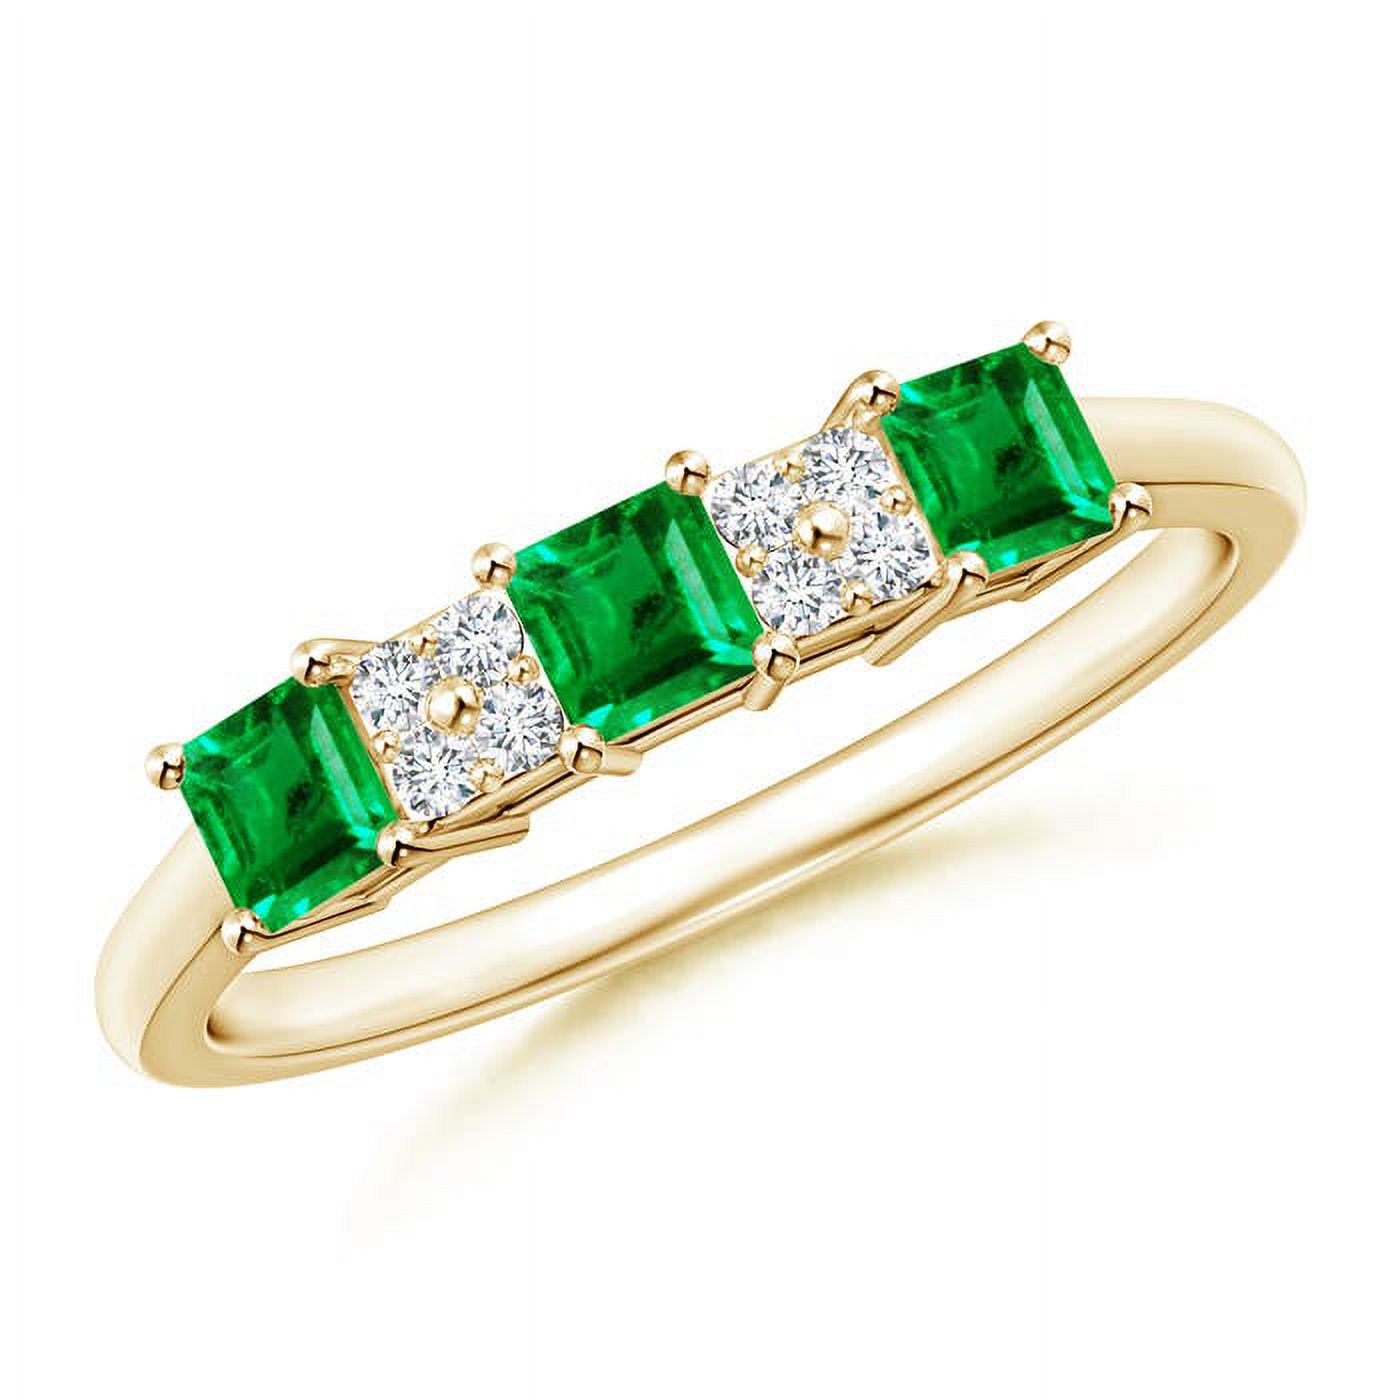 Angara Natural 0.45 Ct. Emerald with Diamond Non Eternity Ring in 14K Yellow Gold for Women (Ring Size: 4) - image 1 of 8